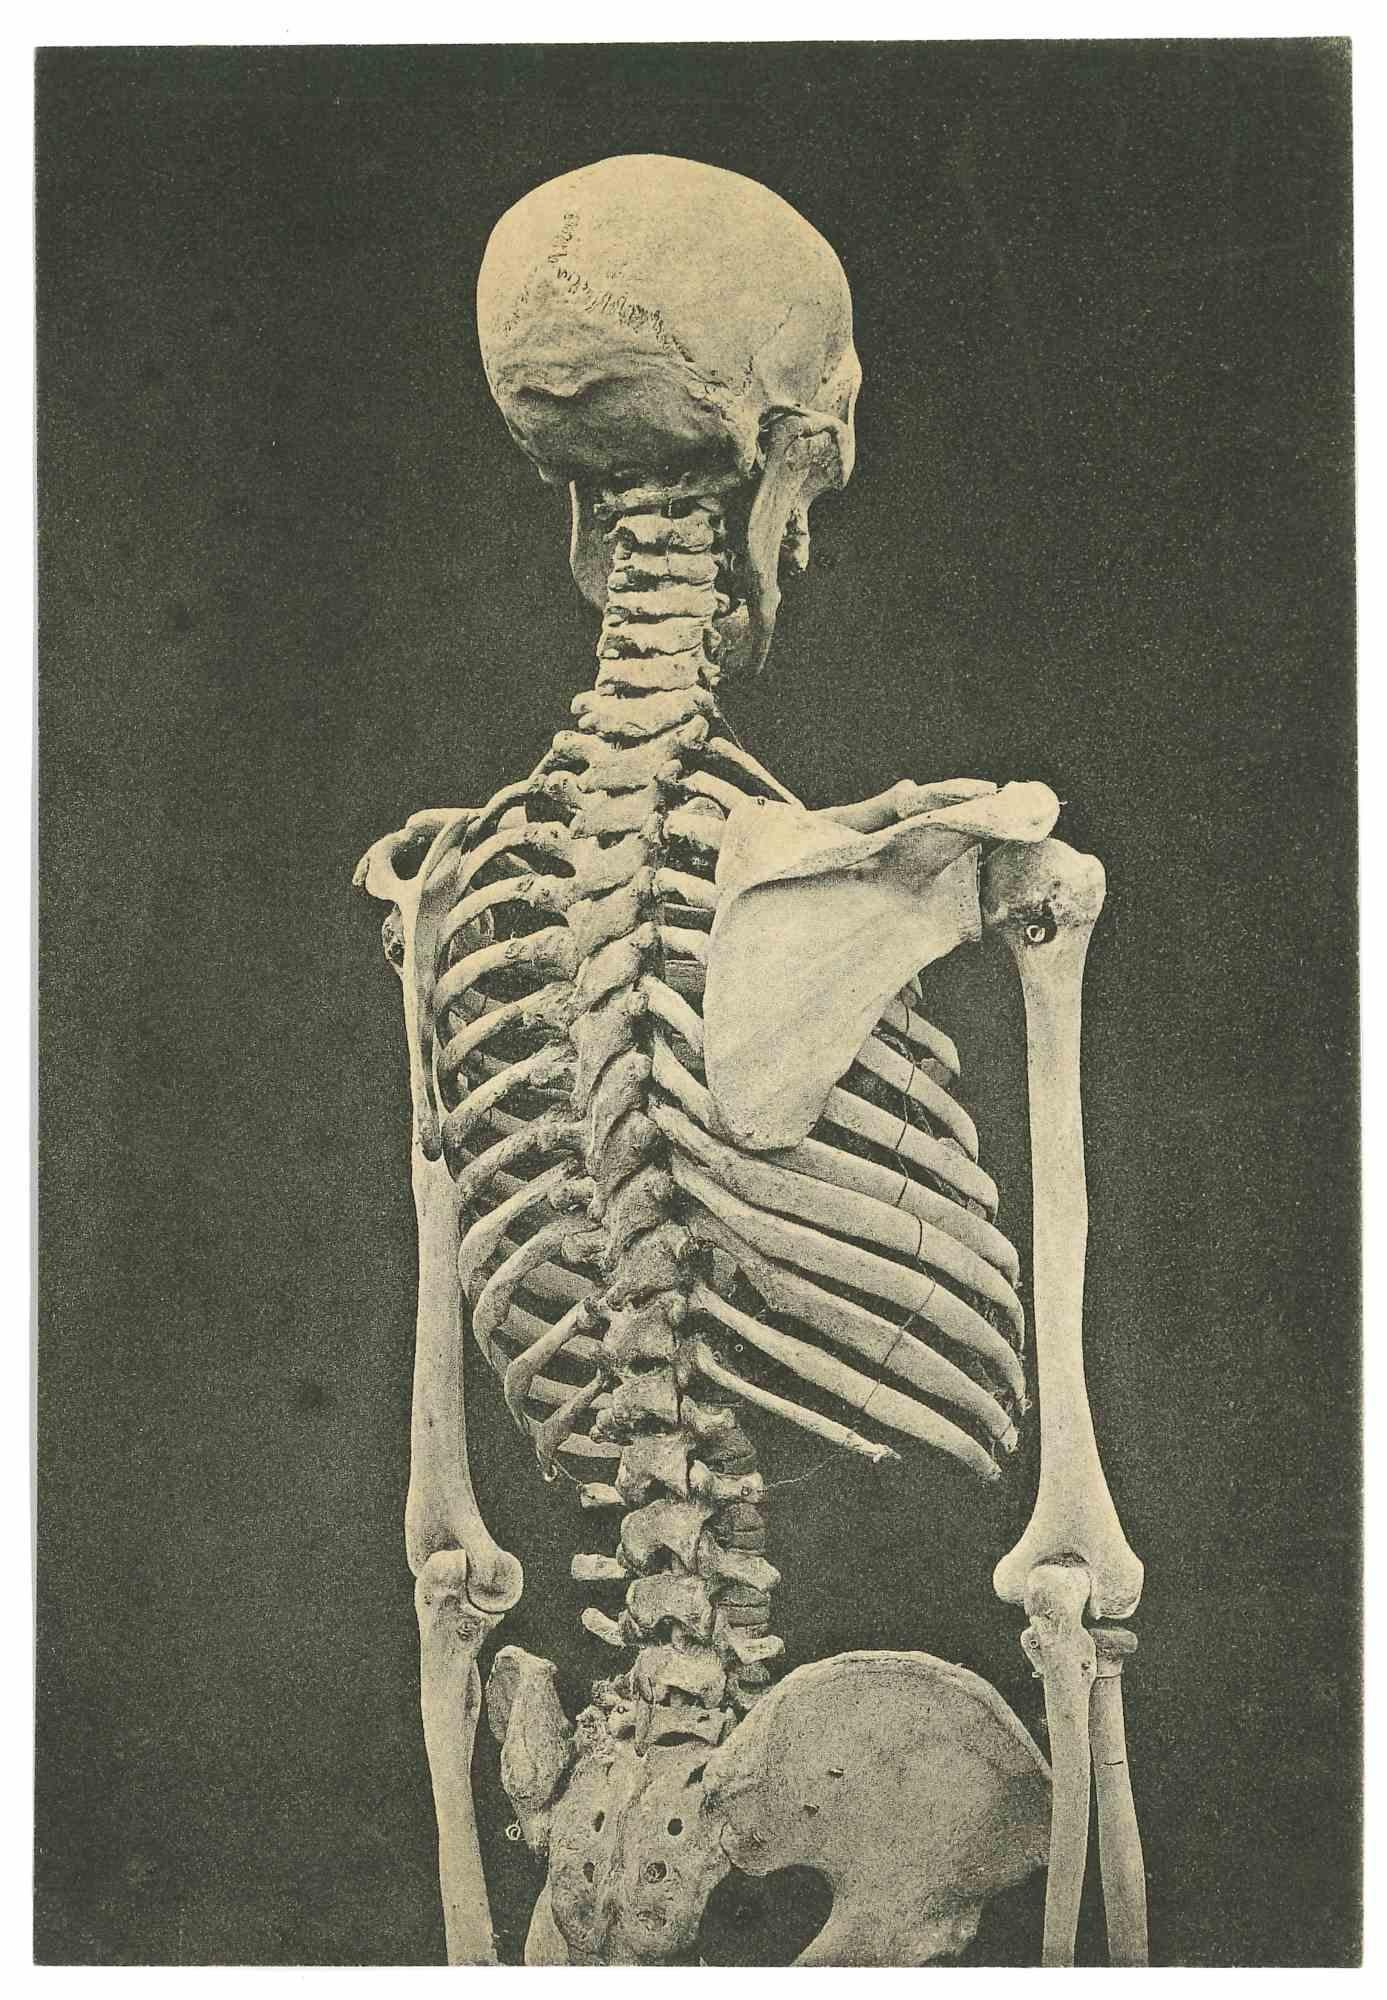 Unknown Figurative Photograph - Vintage Photo - Skeleton - Early 20th Century